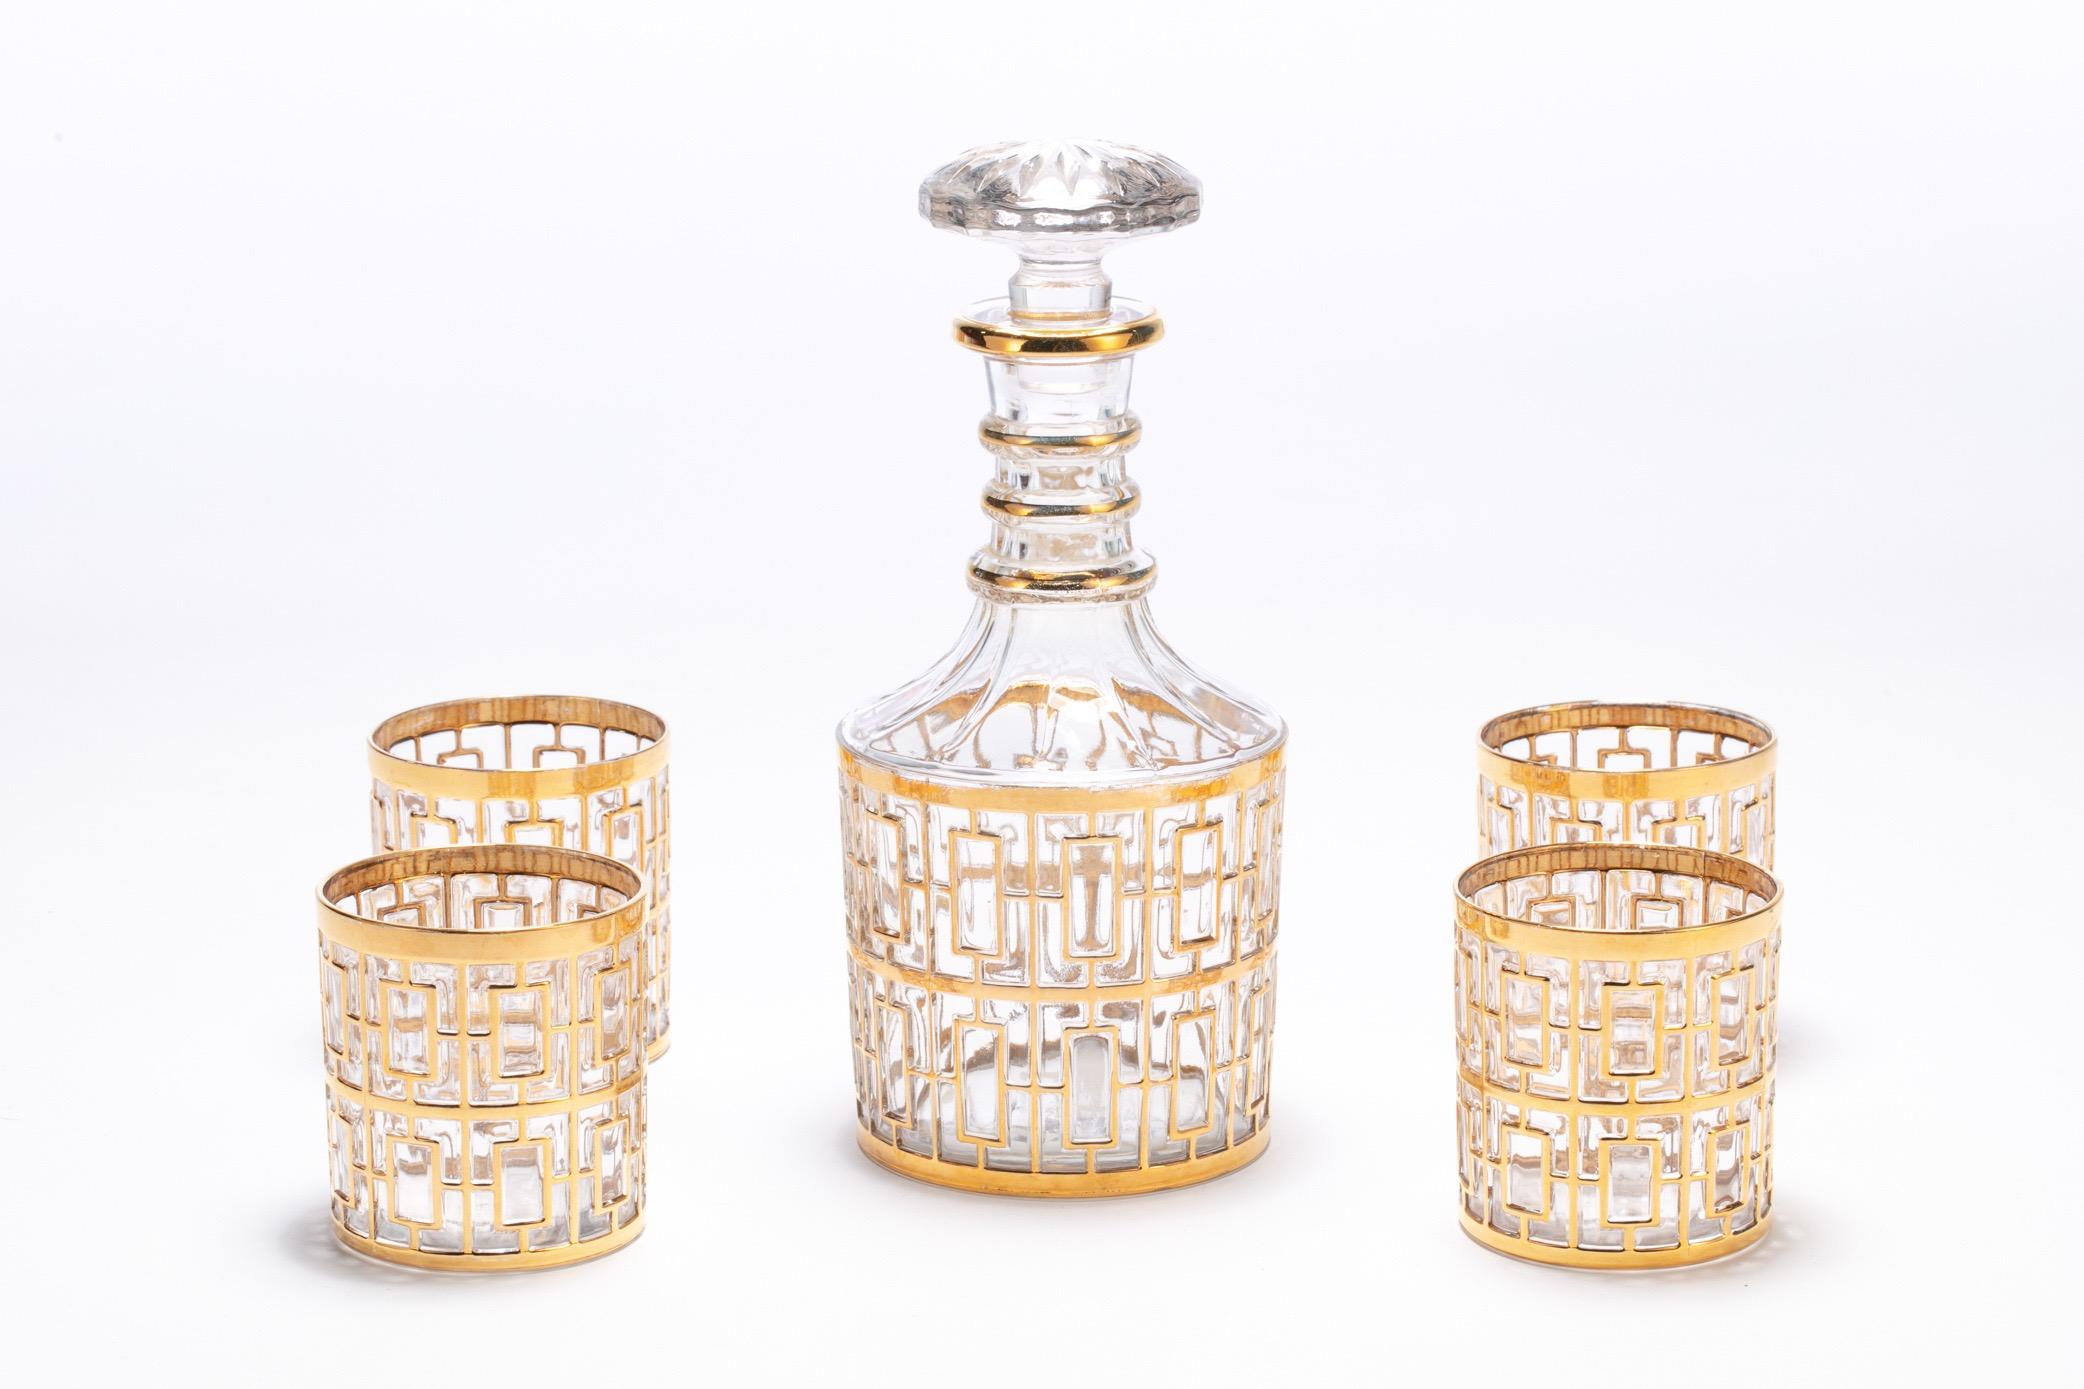 If you're looking for the best in sexy, Hollywood Regency style barware, you've found it. This vintage decanter was manufactured by the Imperial Glass Company in Ohio sometime between 1965 and 1979 and features the iconic trellis pattern - the